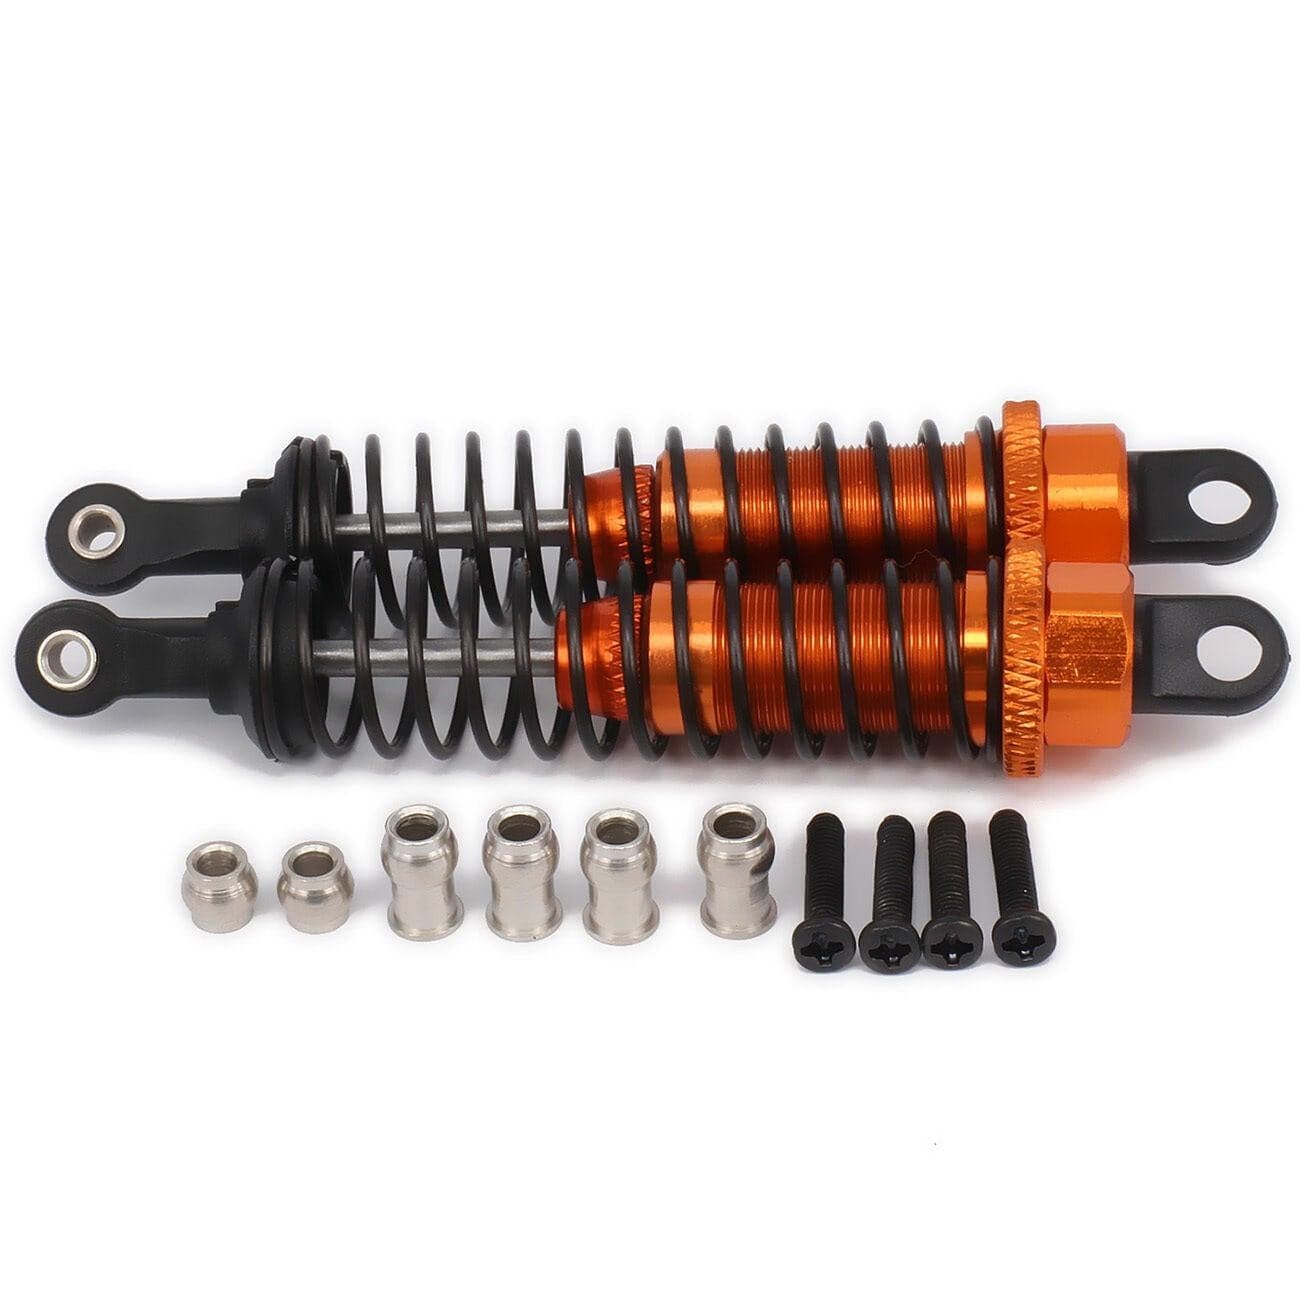 RCAWD RC CAR UPGRADE PARTS Orange RCAWD 80mm Shock Absorber Damper Oil Adjustable Style for 1/16 Rc Car 2pcs